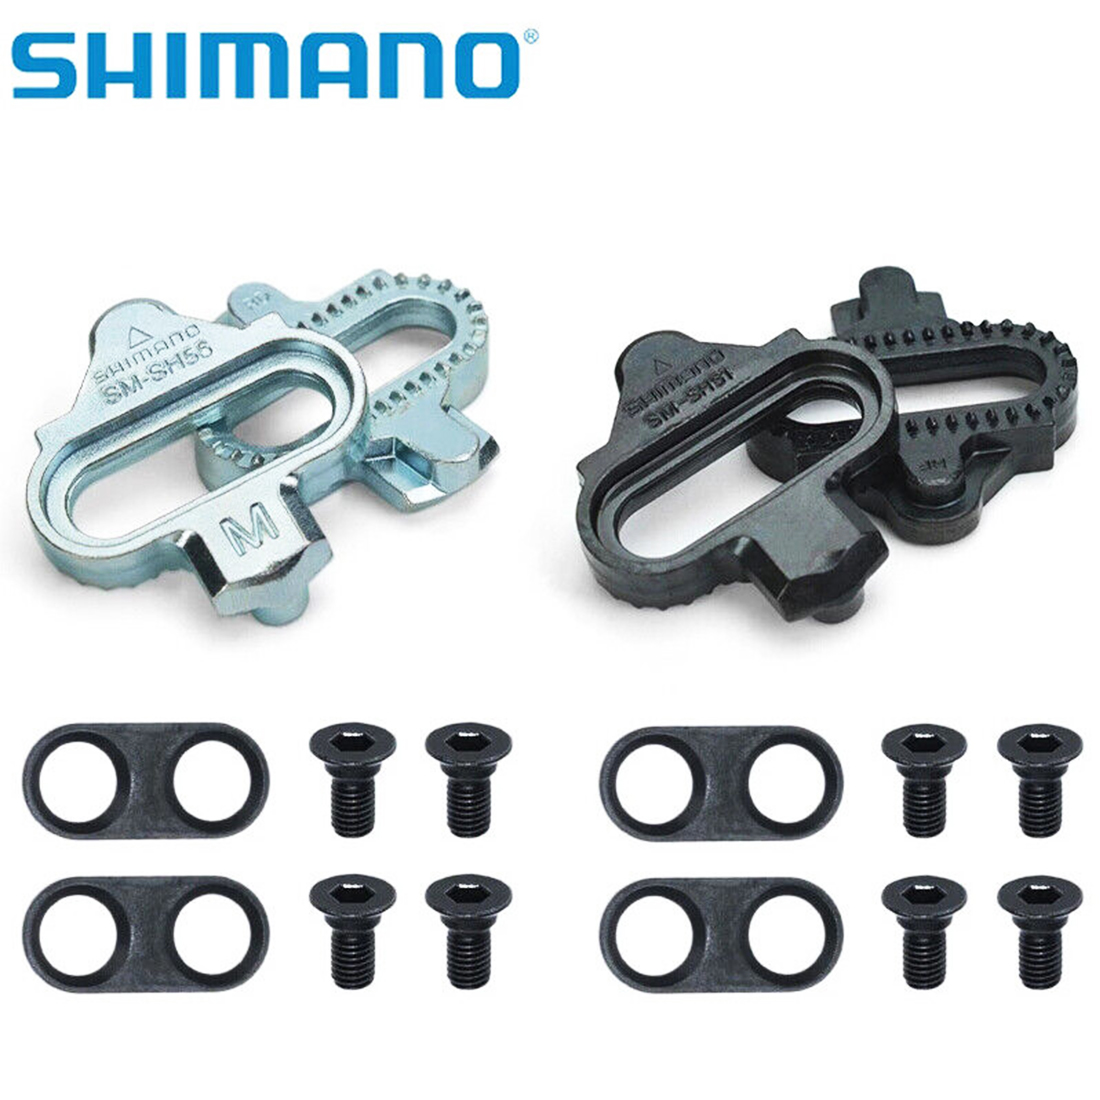 Shimano SPD SM-SH51/SH56 Cleat MTB Single-Directional Release Cleats w/o Plate Nuts - image 5 of 7